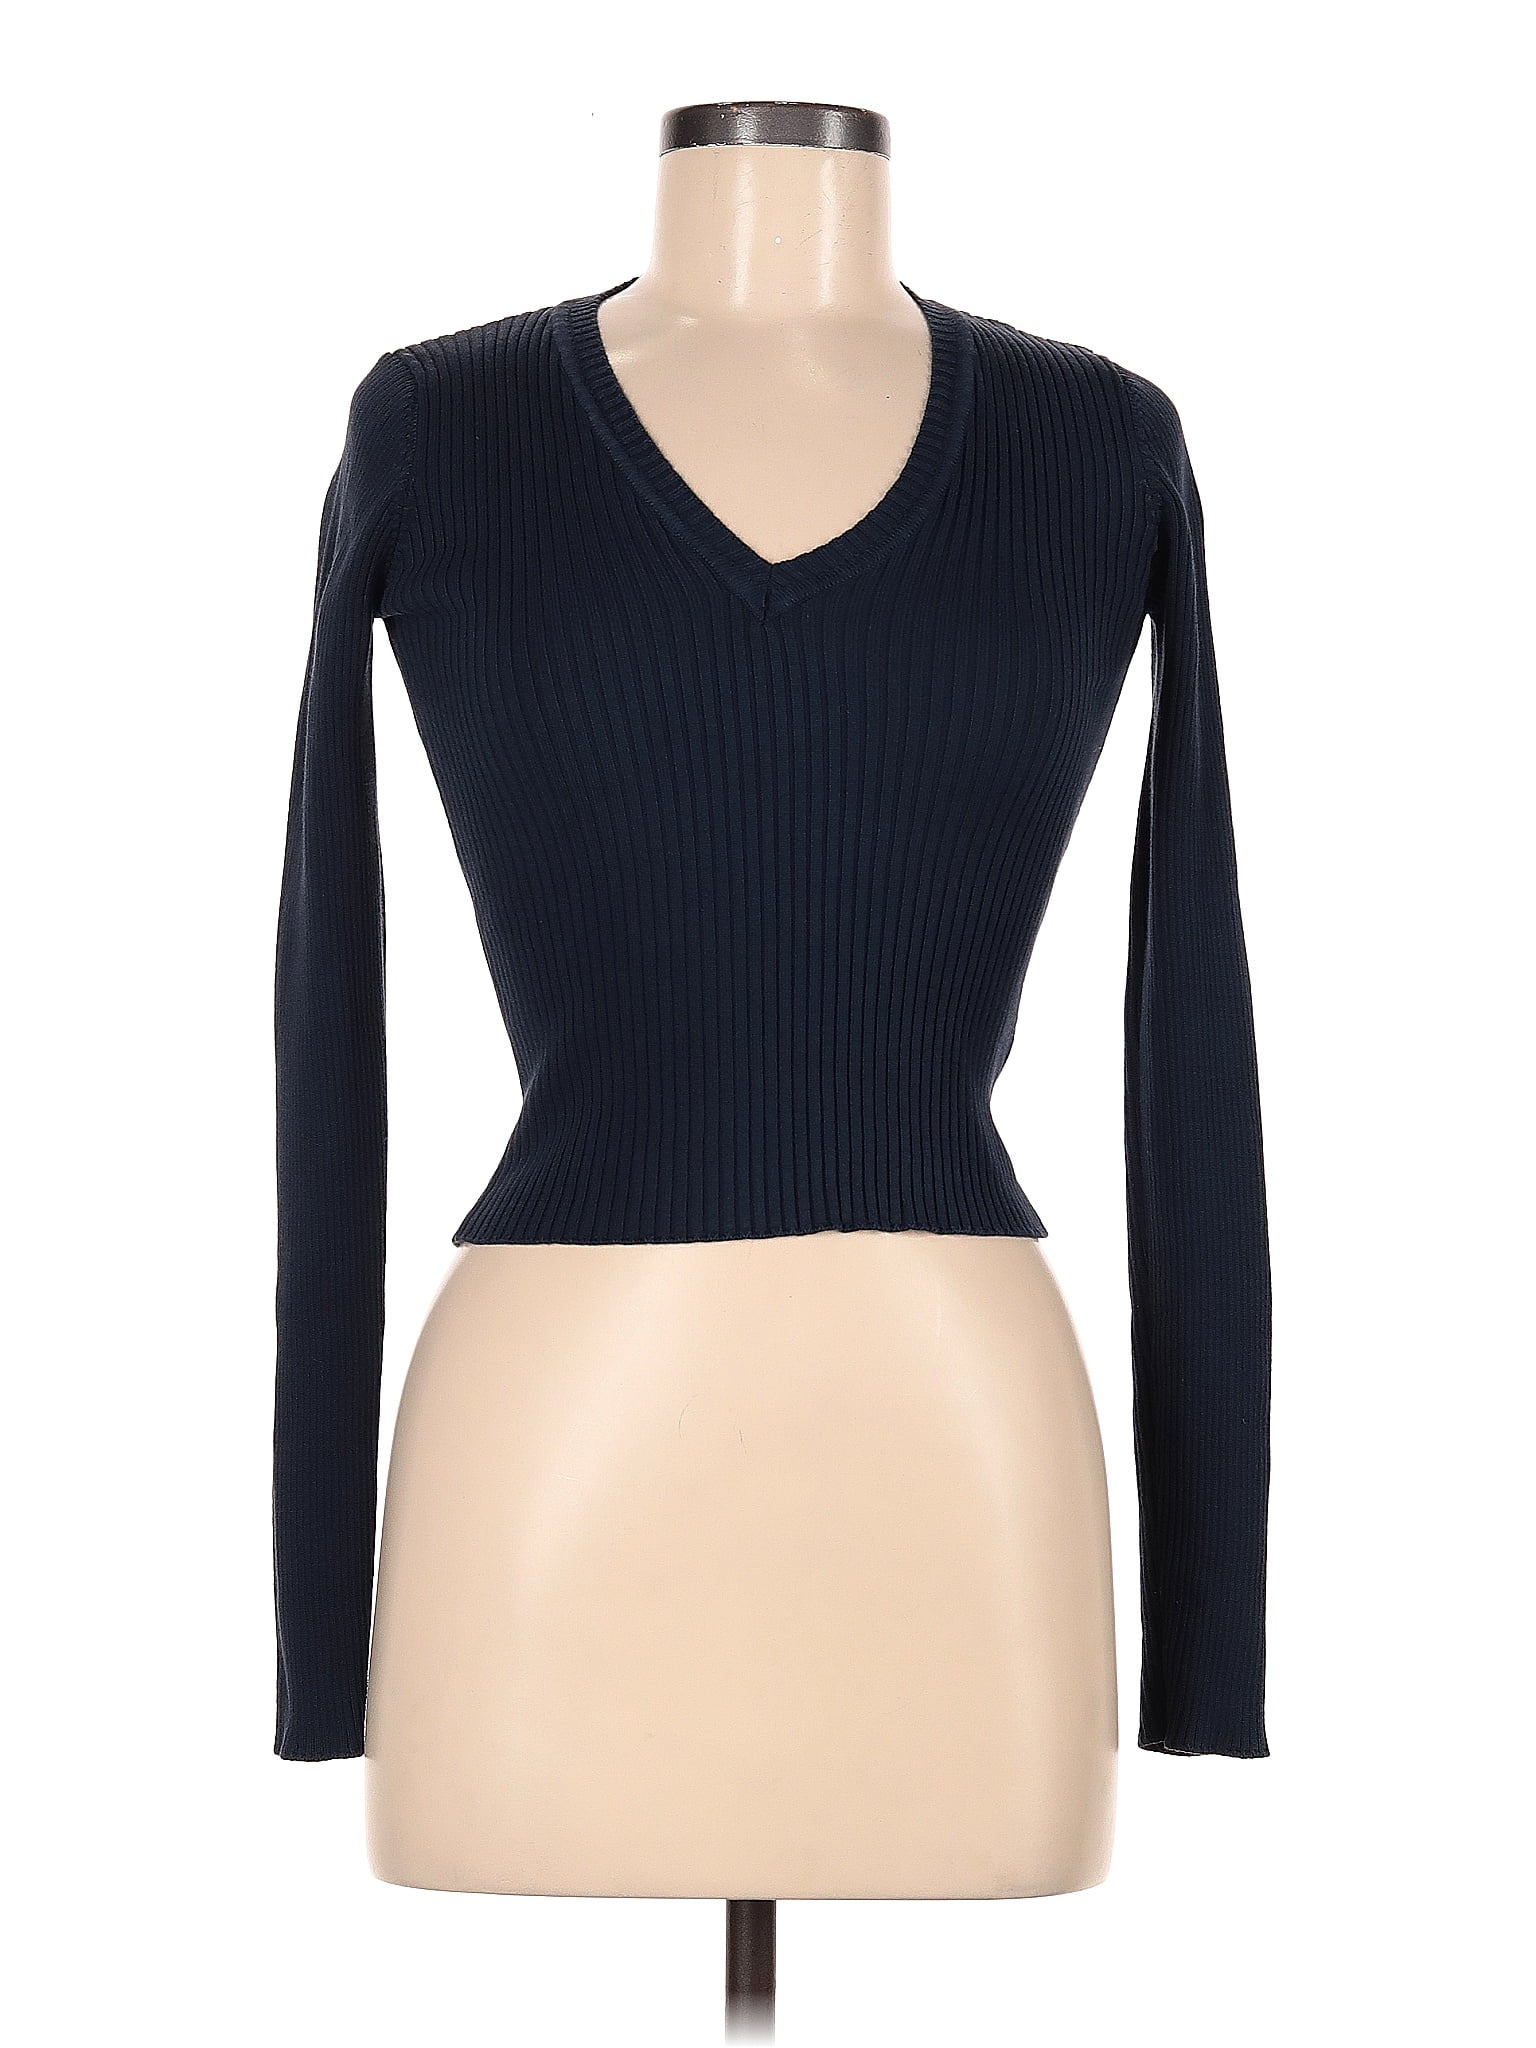 Brandy Melville 100% Cotton Color Block Solid Navy Blue Pullover Sweater  Size ESTIMATE - 60% off